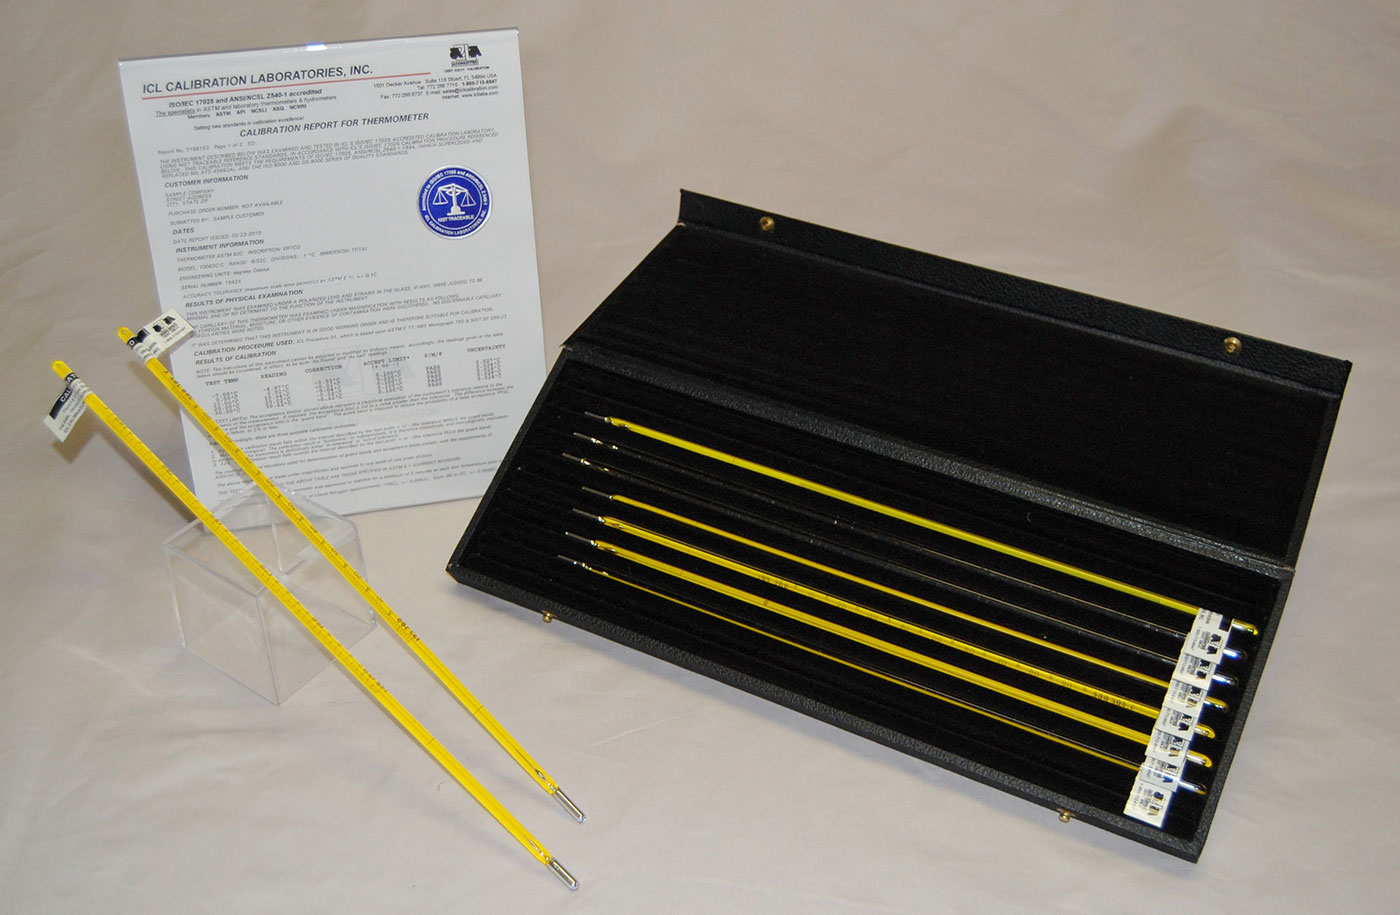 An image showing a set of ASTM thermometers used for quality controls and calibration purposes.